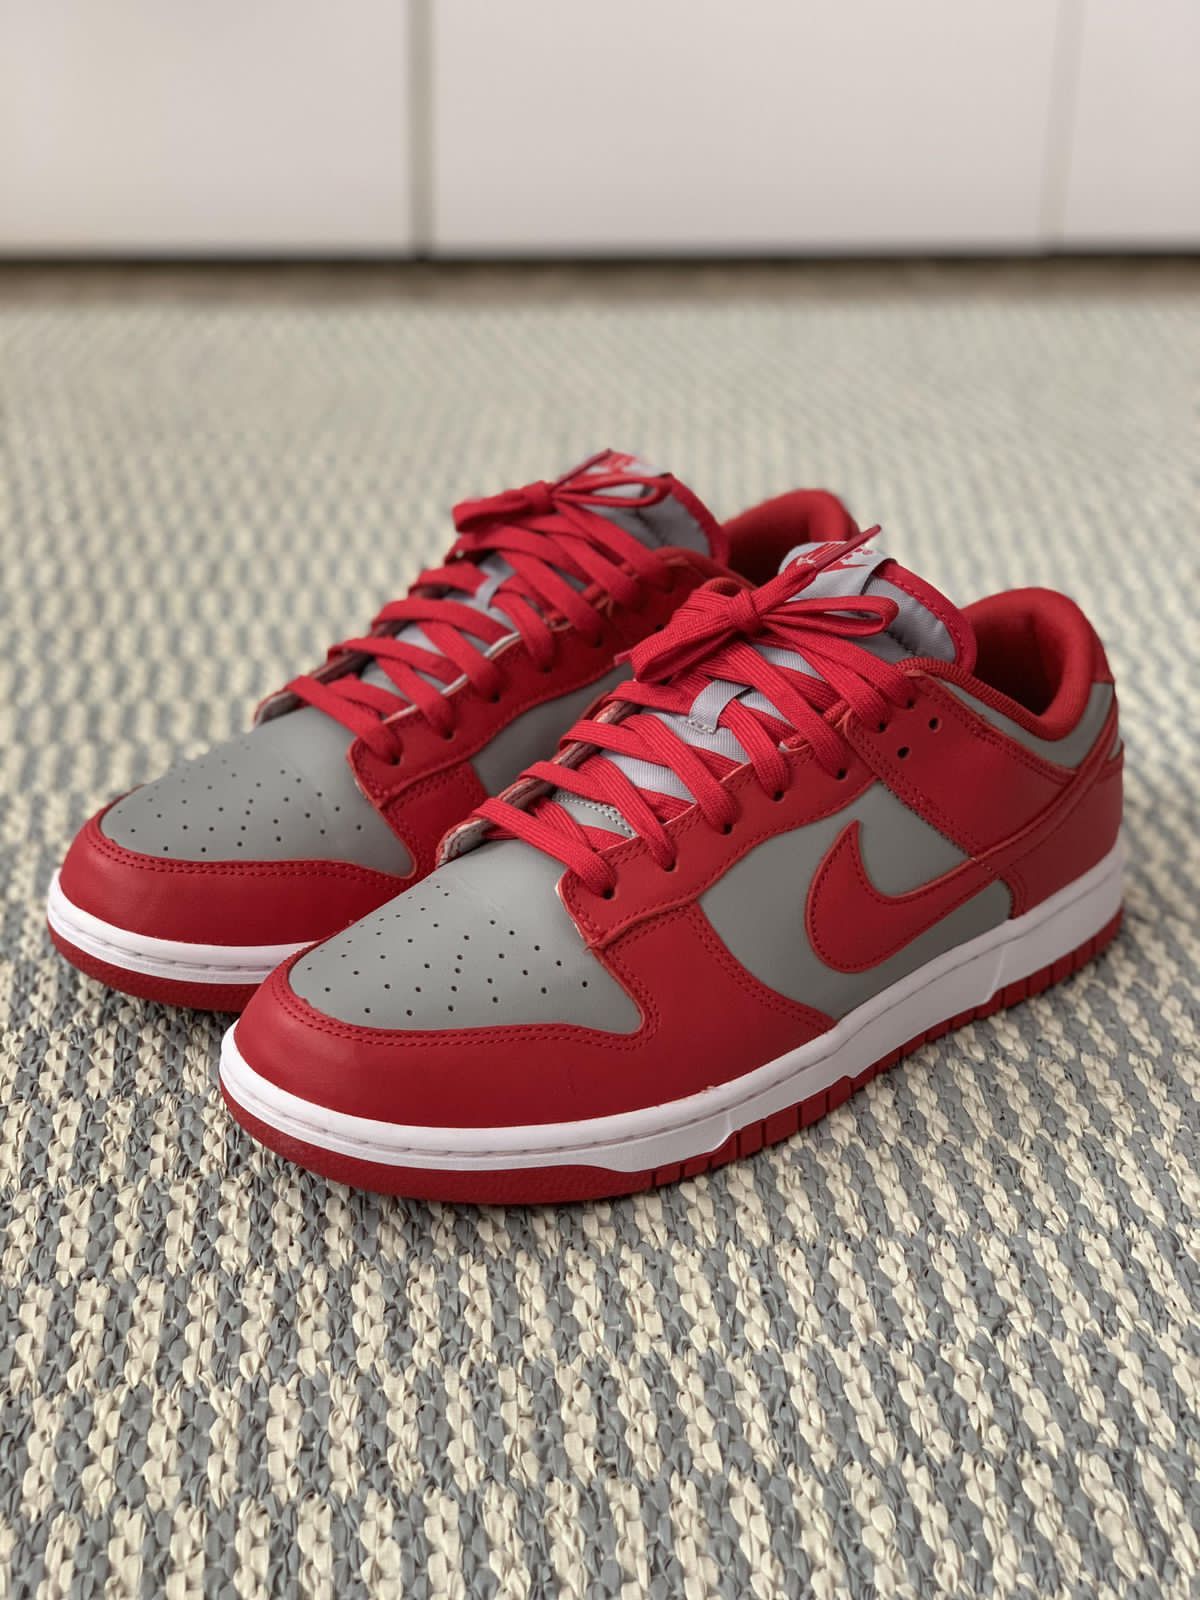 SB Dunk University Red Sneakers For Boys